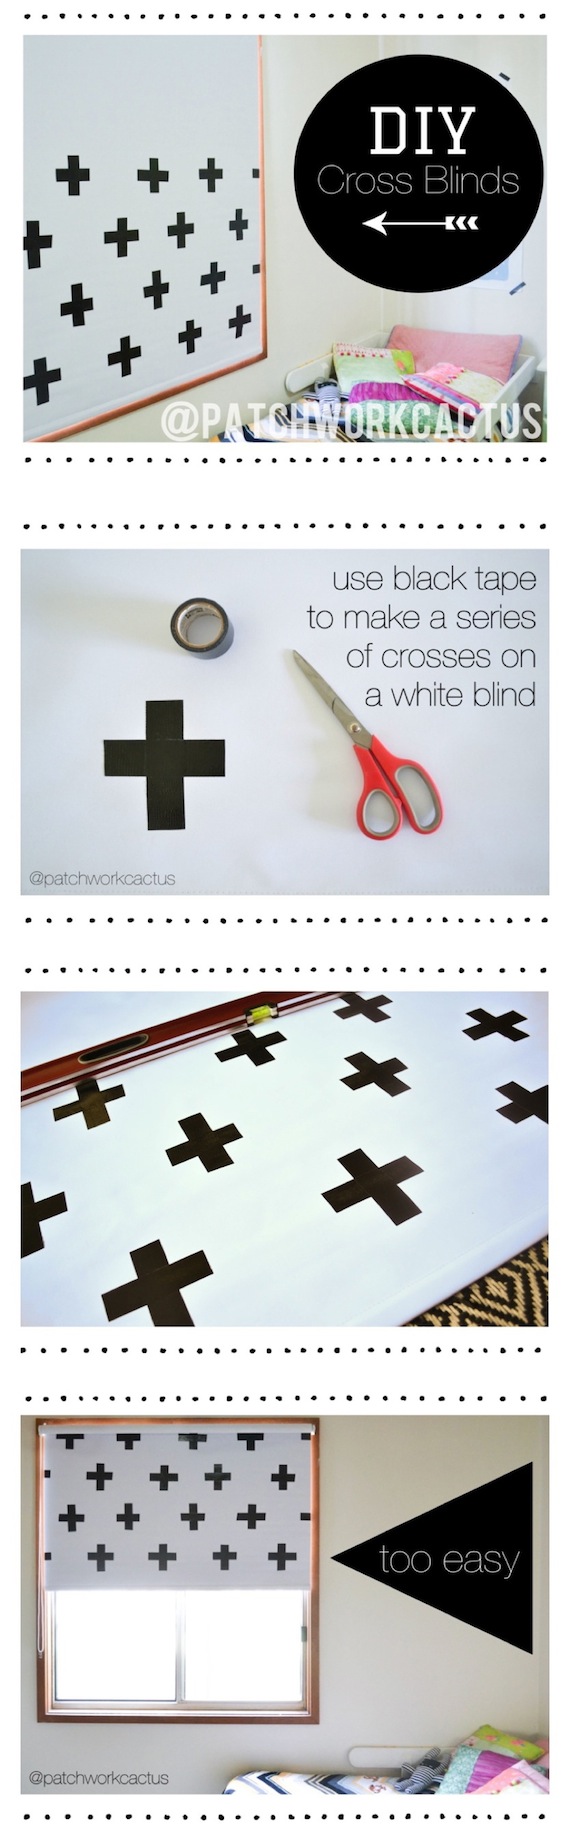 DIY Blinds tutorial by patchworkcactus - black and white crosses